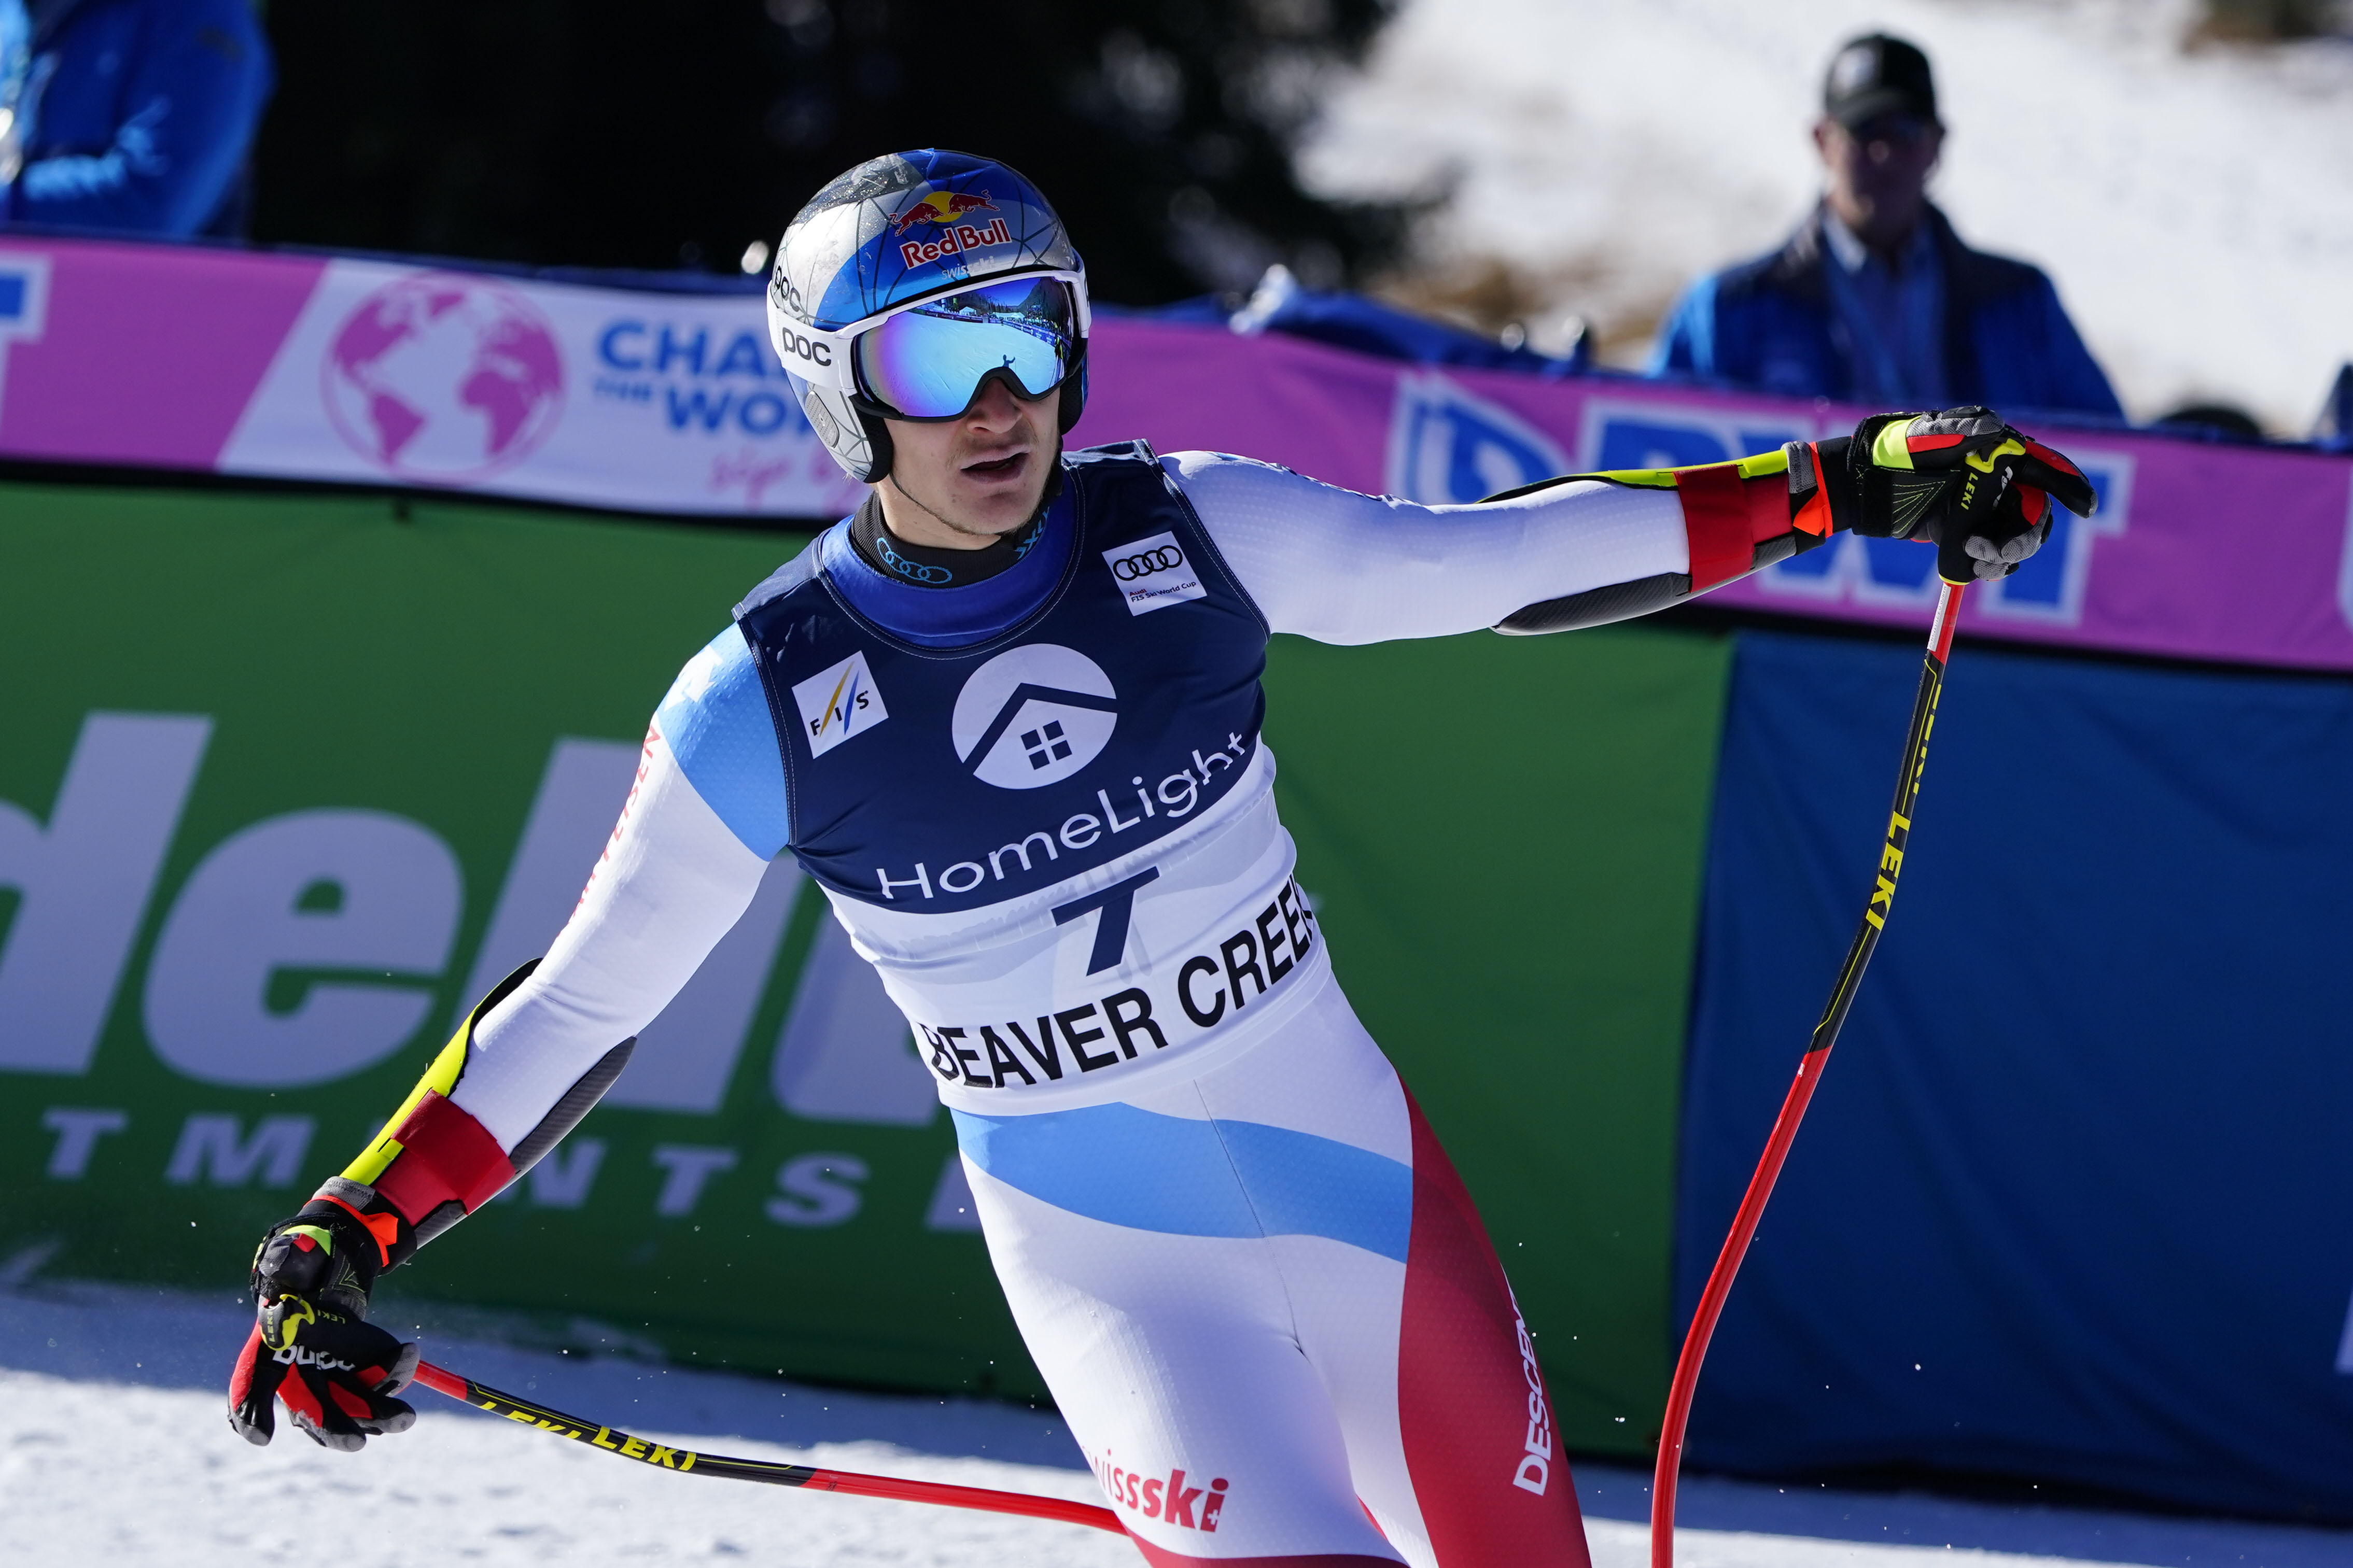 Dec 2, 2021; Beaver Creek, Colorado, USA; Marco Odermatt of Switzerland reacts after finishing during first of two men's Super G races at the Birds of Prey FIS alpine skiing World Cup at Beaver Creek. Mandatory Credit: Michael Madrid-USA TODAY Sports